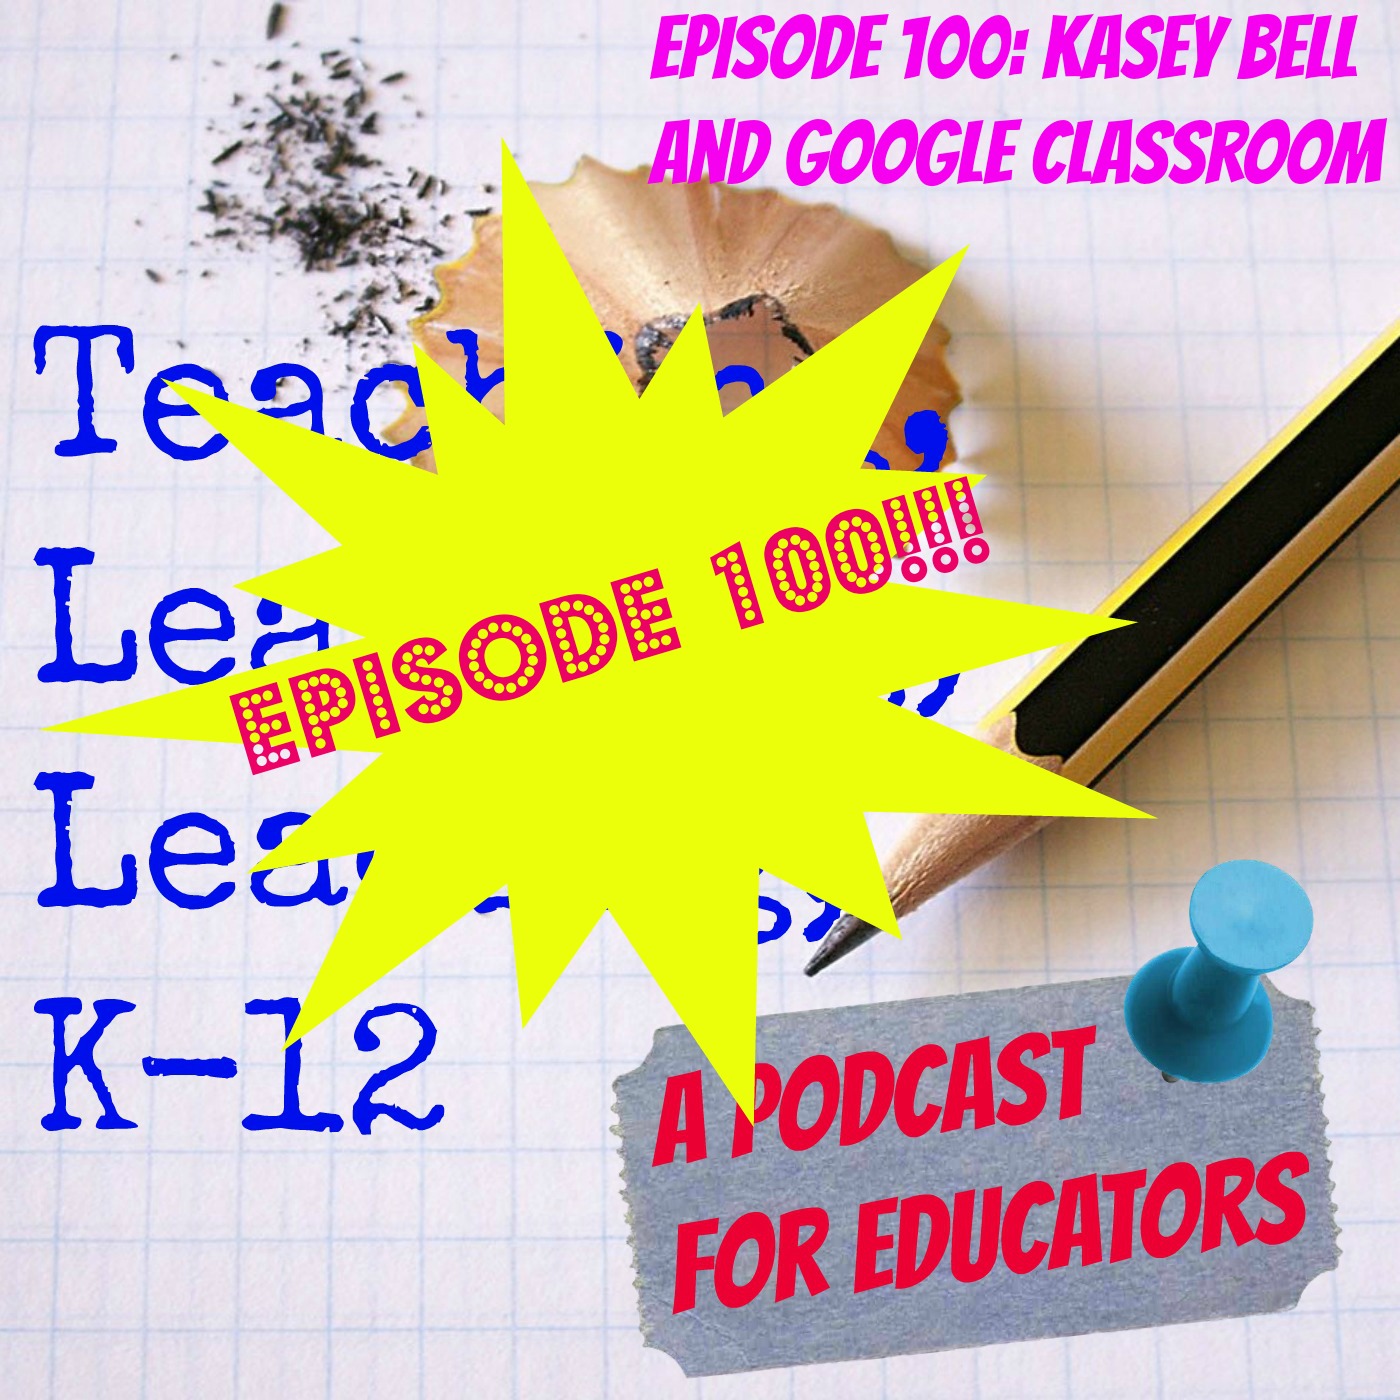 Episode 100: Kasey Bell and Google Classroom Image